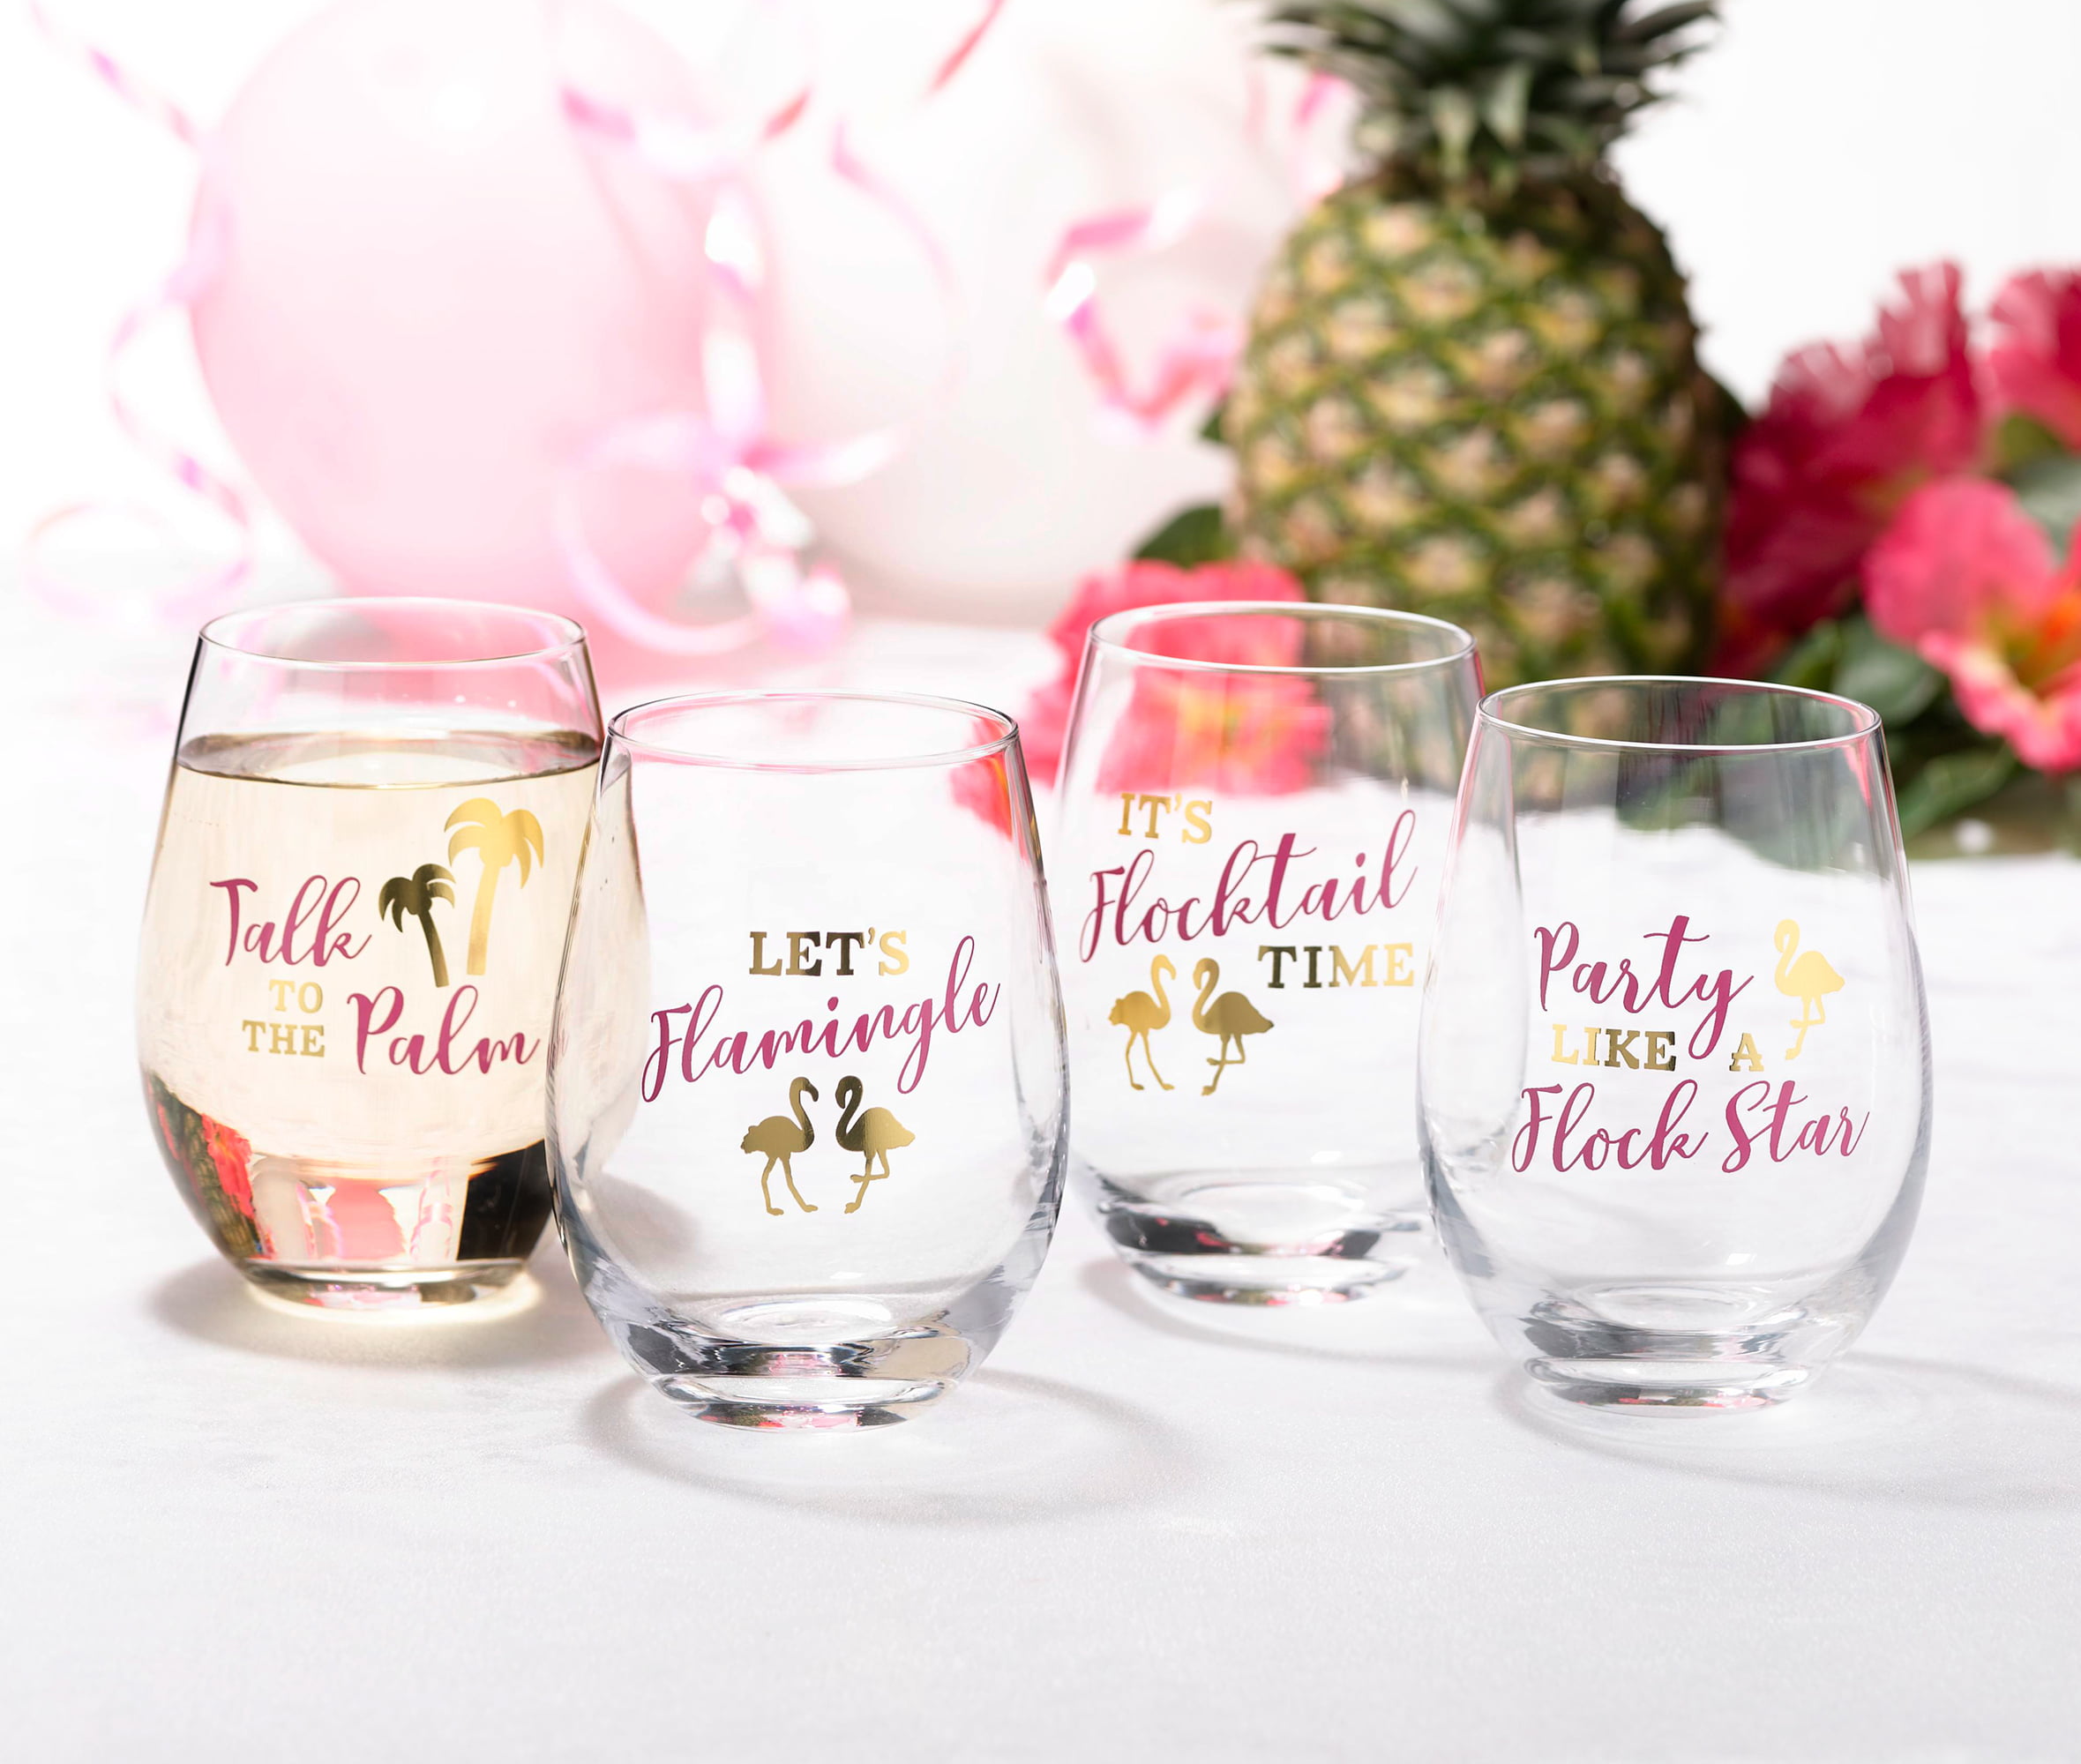 Curata Lillian Rose Wine A Lot Set of 2 Stemless Wine Glasses with Assorted Sayings - White